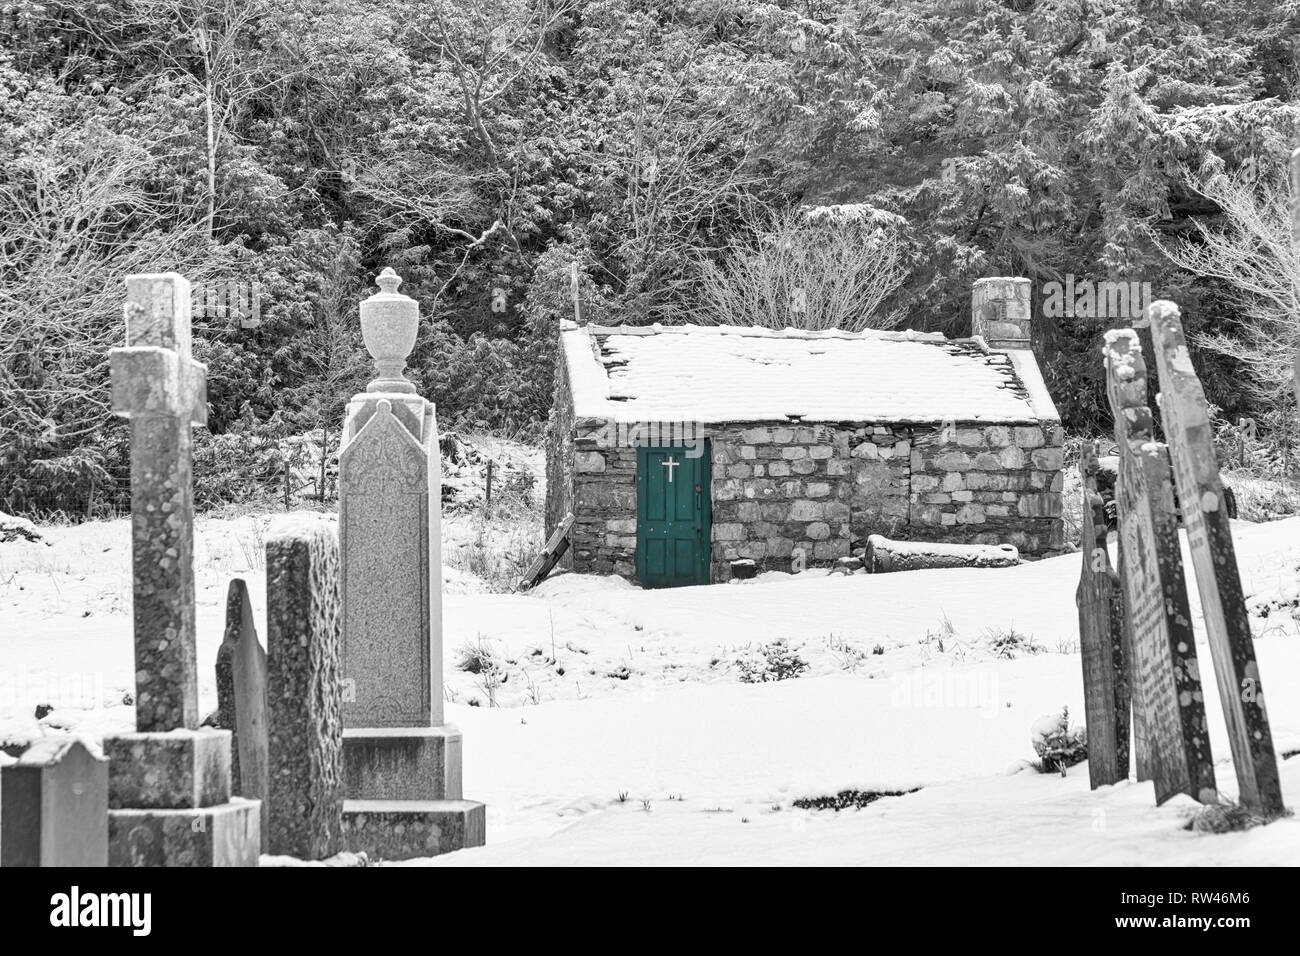 chapel in grounds of St John's Episcopal Church and gravestones in the snow at Ballachulish, Highlands, Scotland, UK on winters day in February - B&W Stock Photo